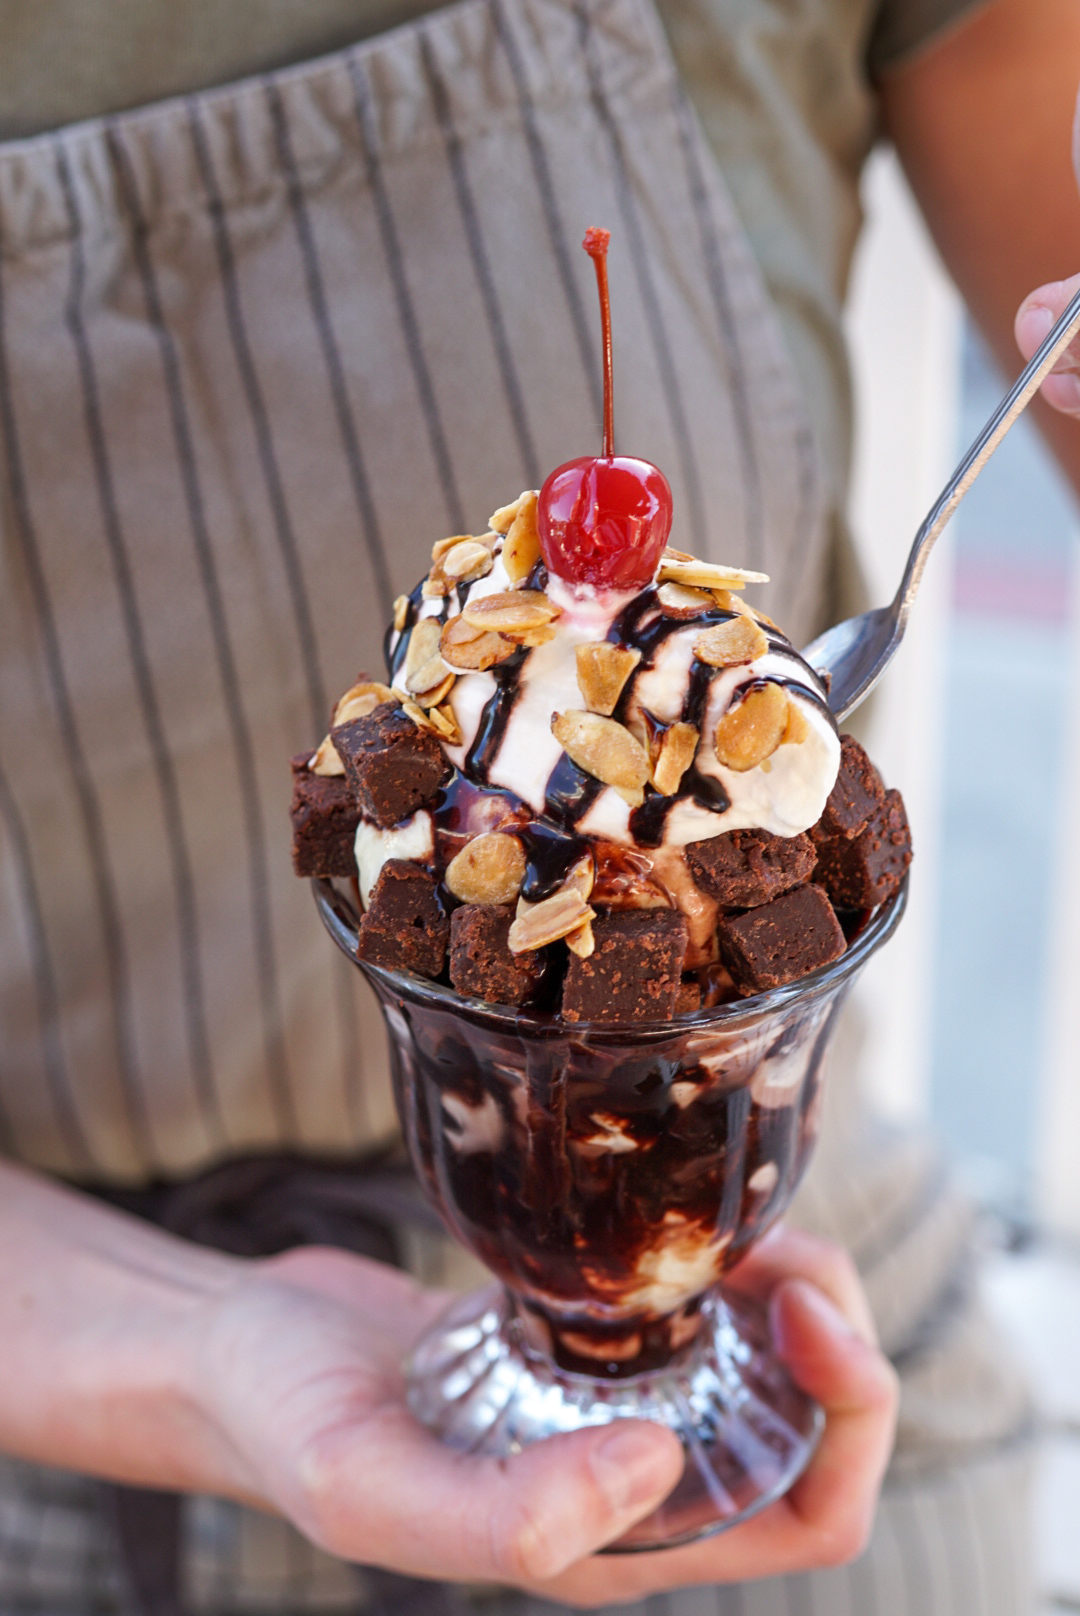 Woman's hands holding a Brownie Sundae and dipping a spoon into it